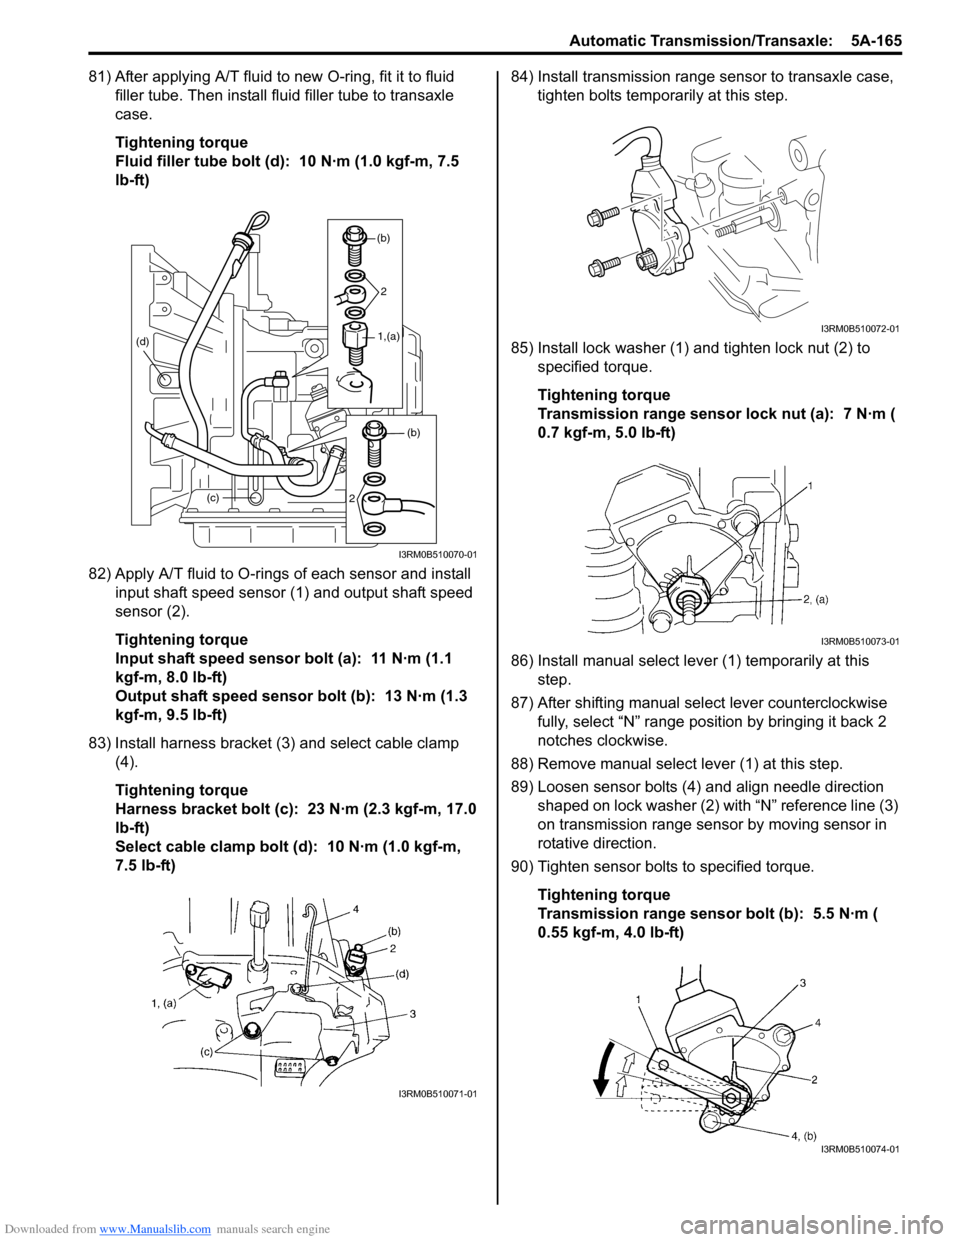 SUZUKI SWIFT 2008 2.G Service Workshop Manual Downloaded from www.Manualslib.com manuals search engine Automatic Transmission/Transaxle:  5A-165
81) After applying A/T fluid to new O-ring, fit it to fluid filler tube. Then install fl uid filler t